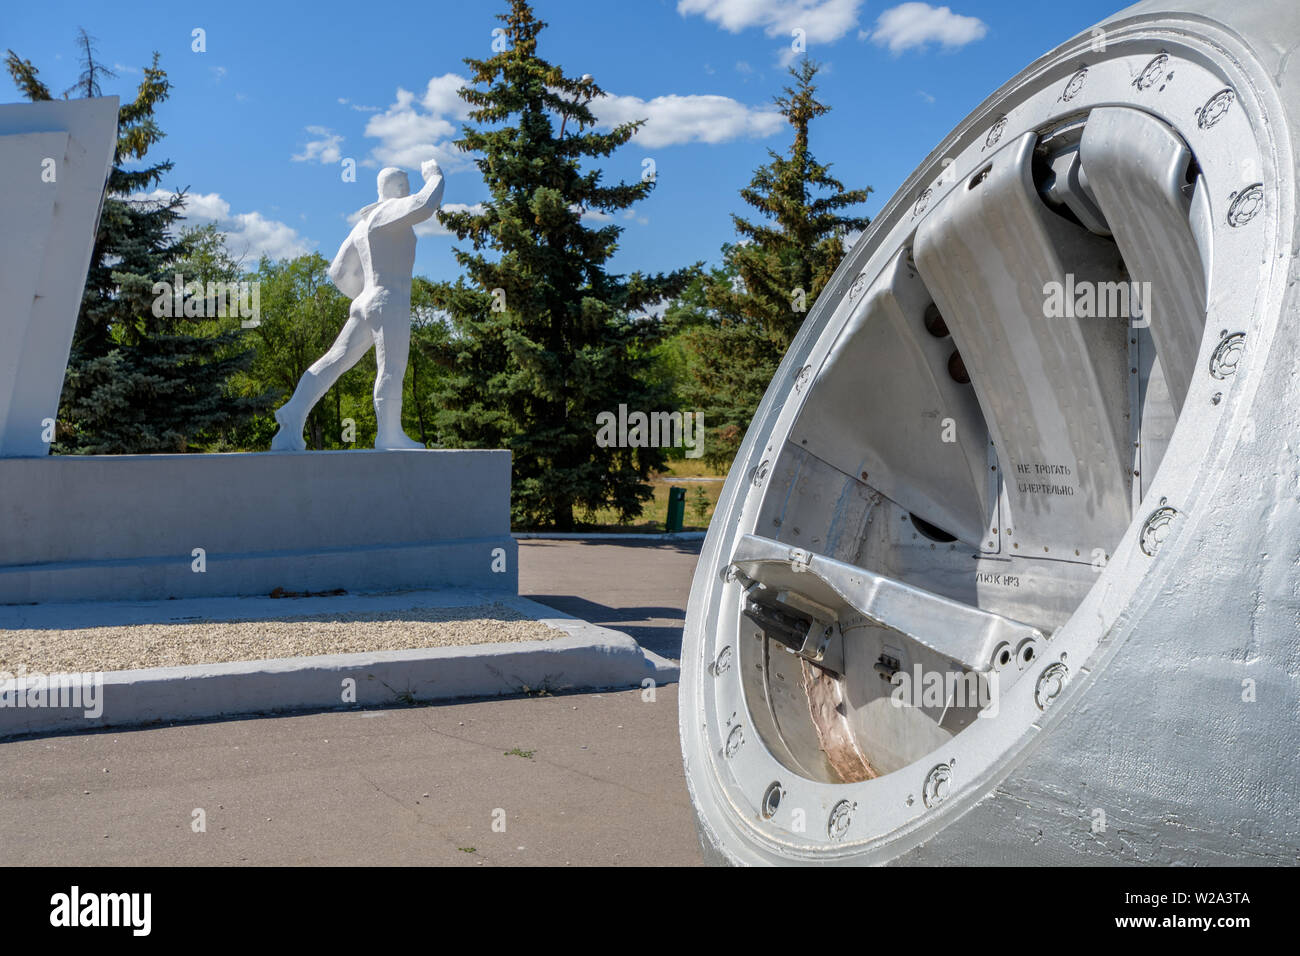 SMELOVKA, SARATOV, RUSSIA - JULY 2019: Place of landing of the first cosmonaut Yuri Gagarin. Stock Photo